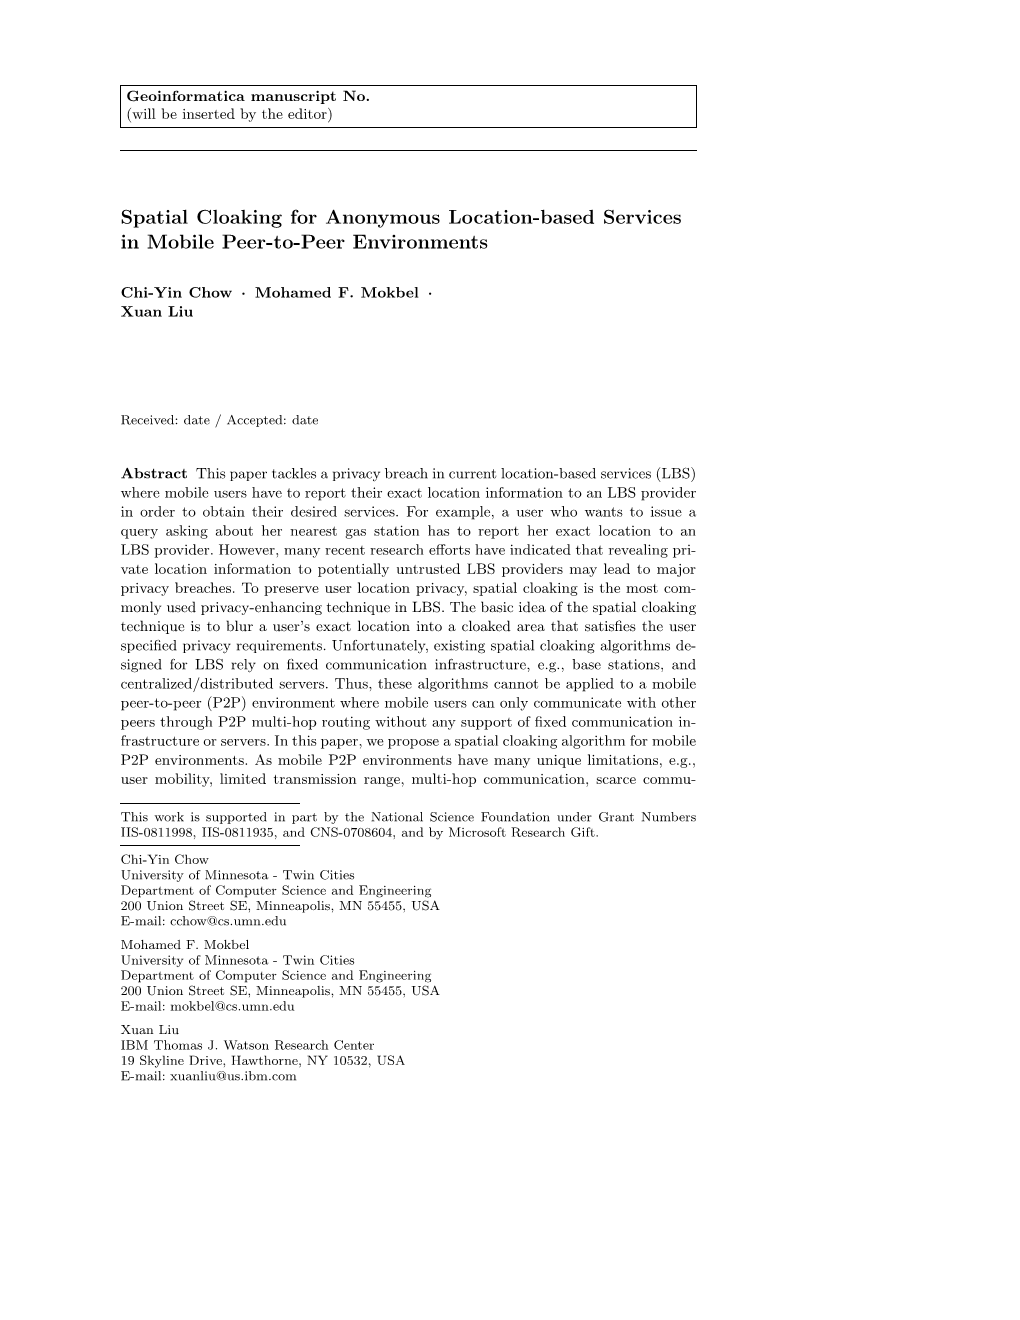 Spatial Cloaking for Anonymous Location-Based Services in Mobile Peer-To-Peer Environments